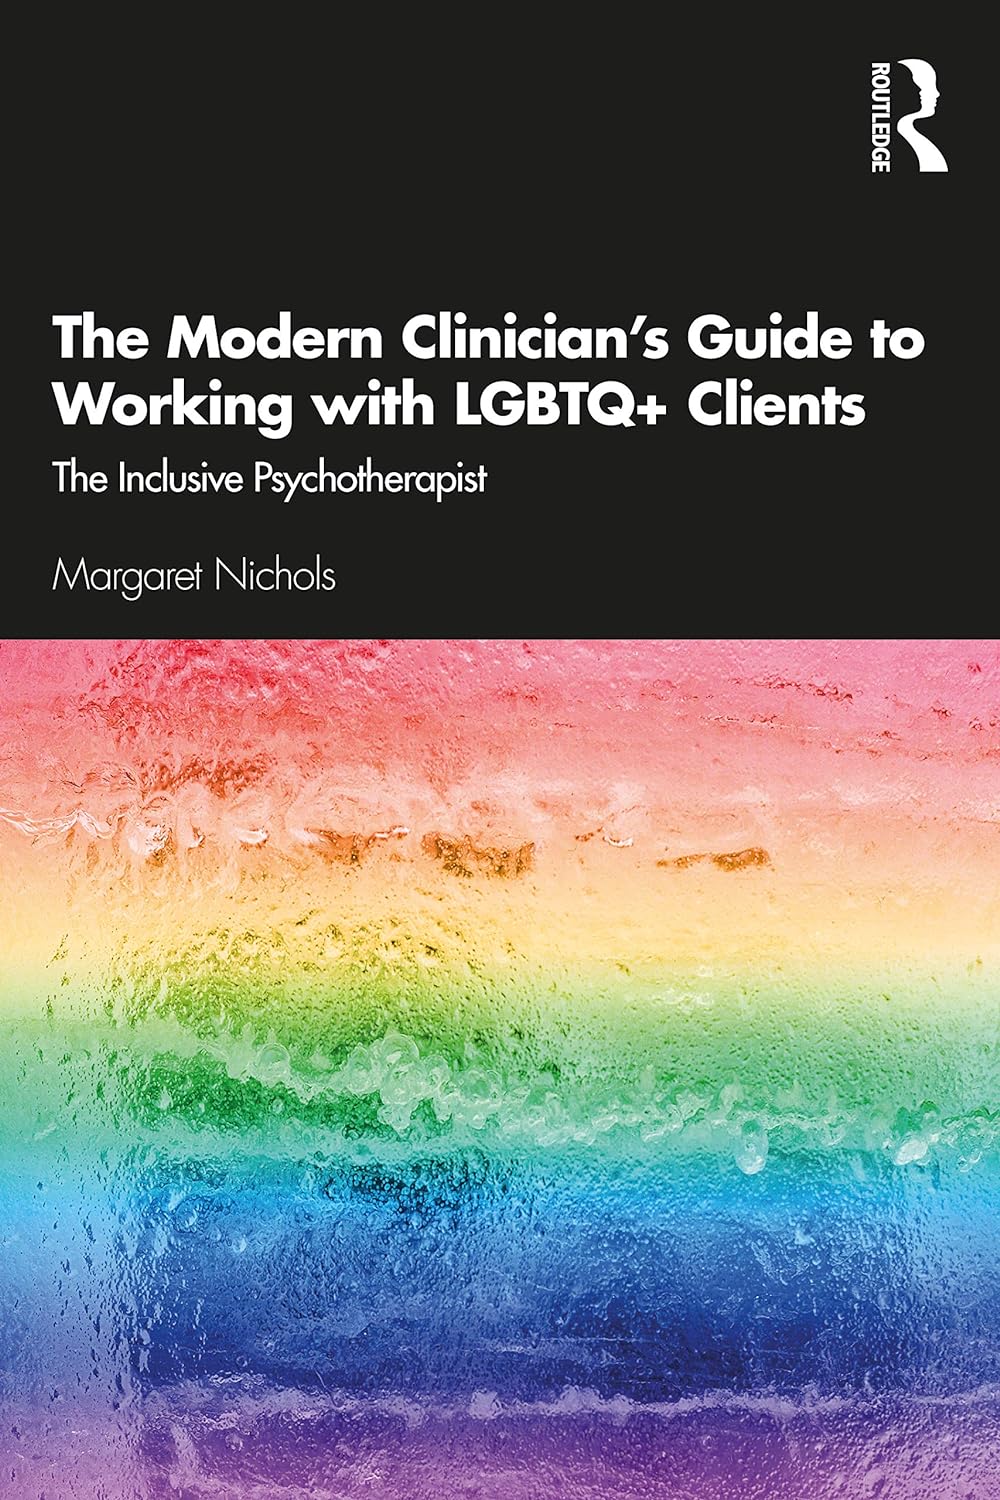 The Modern Clinician's Guide